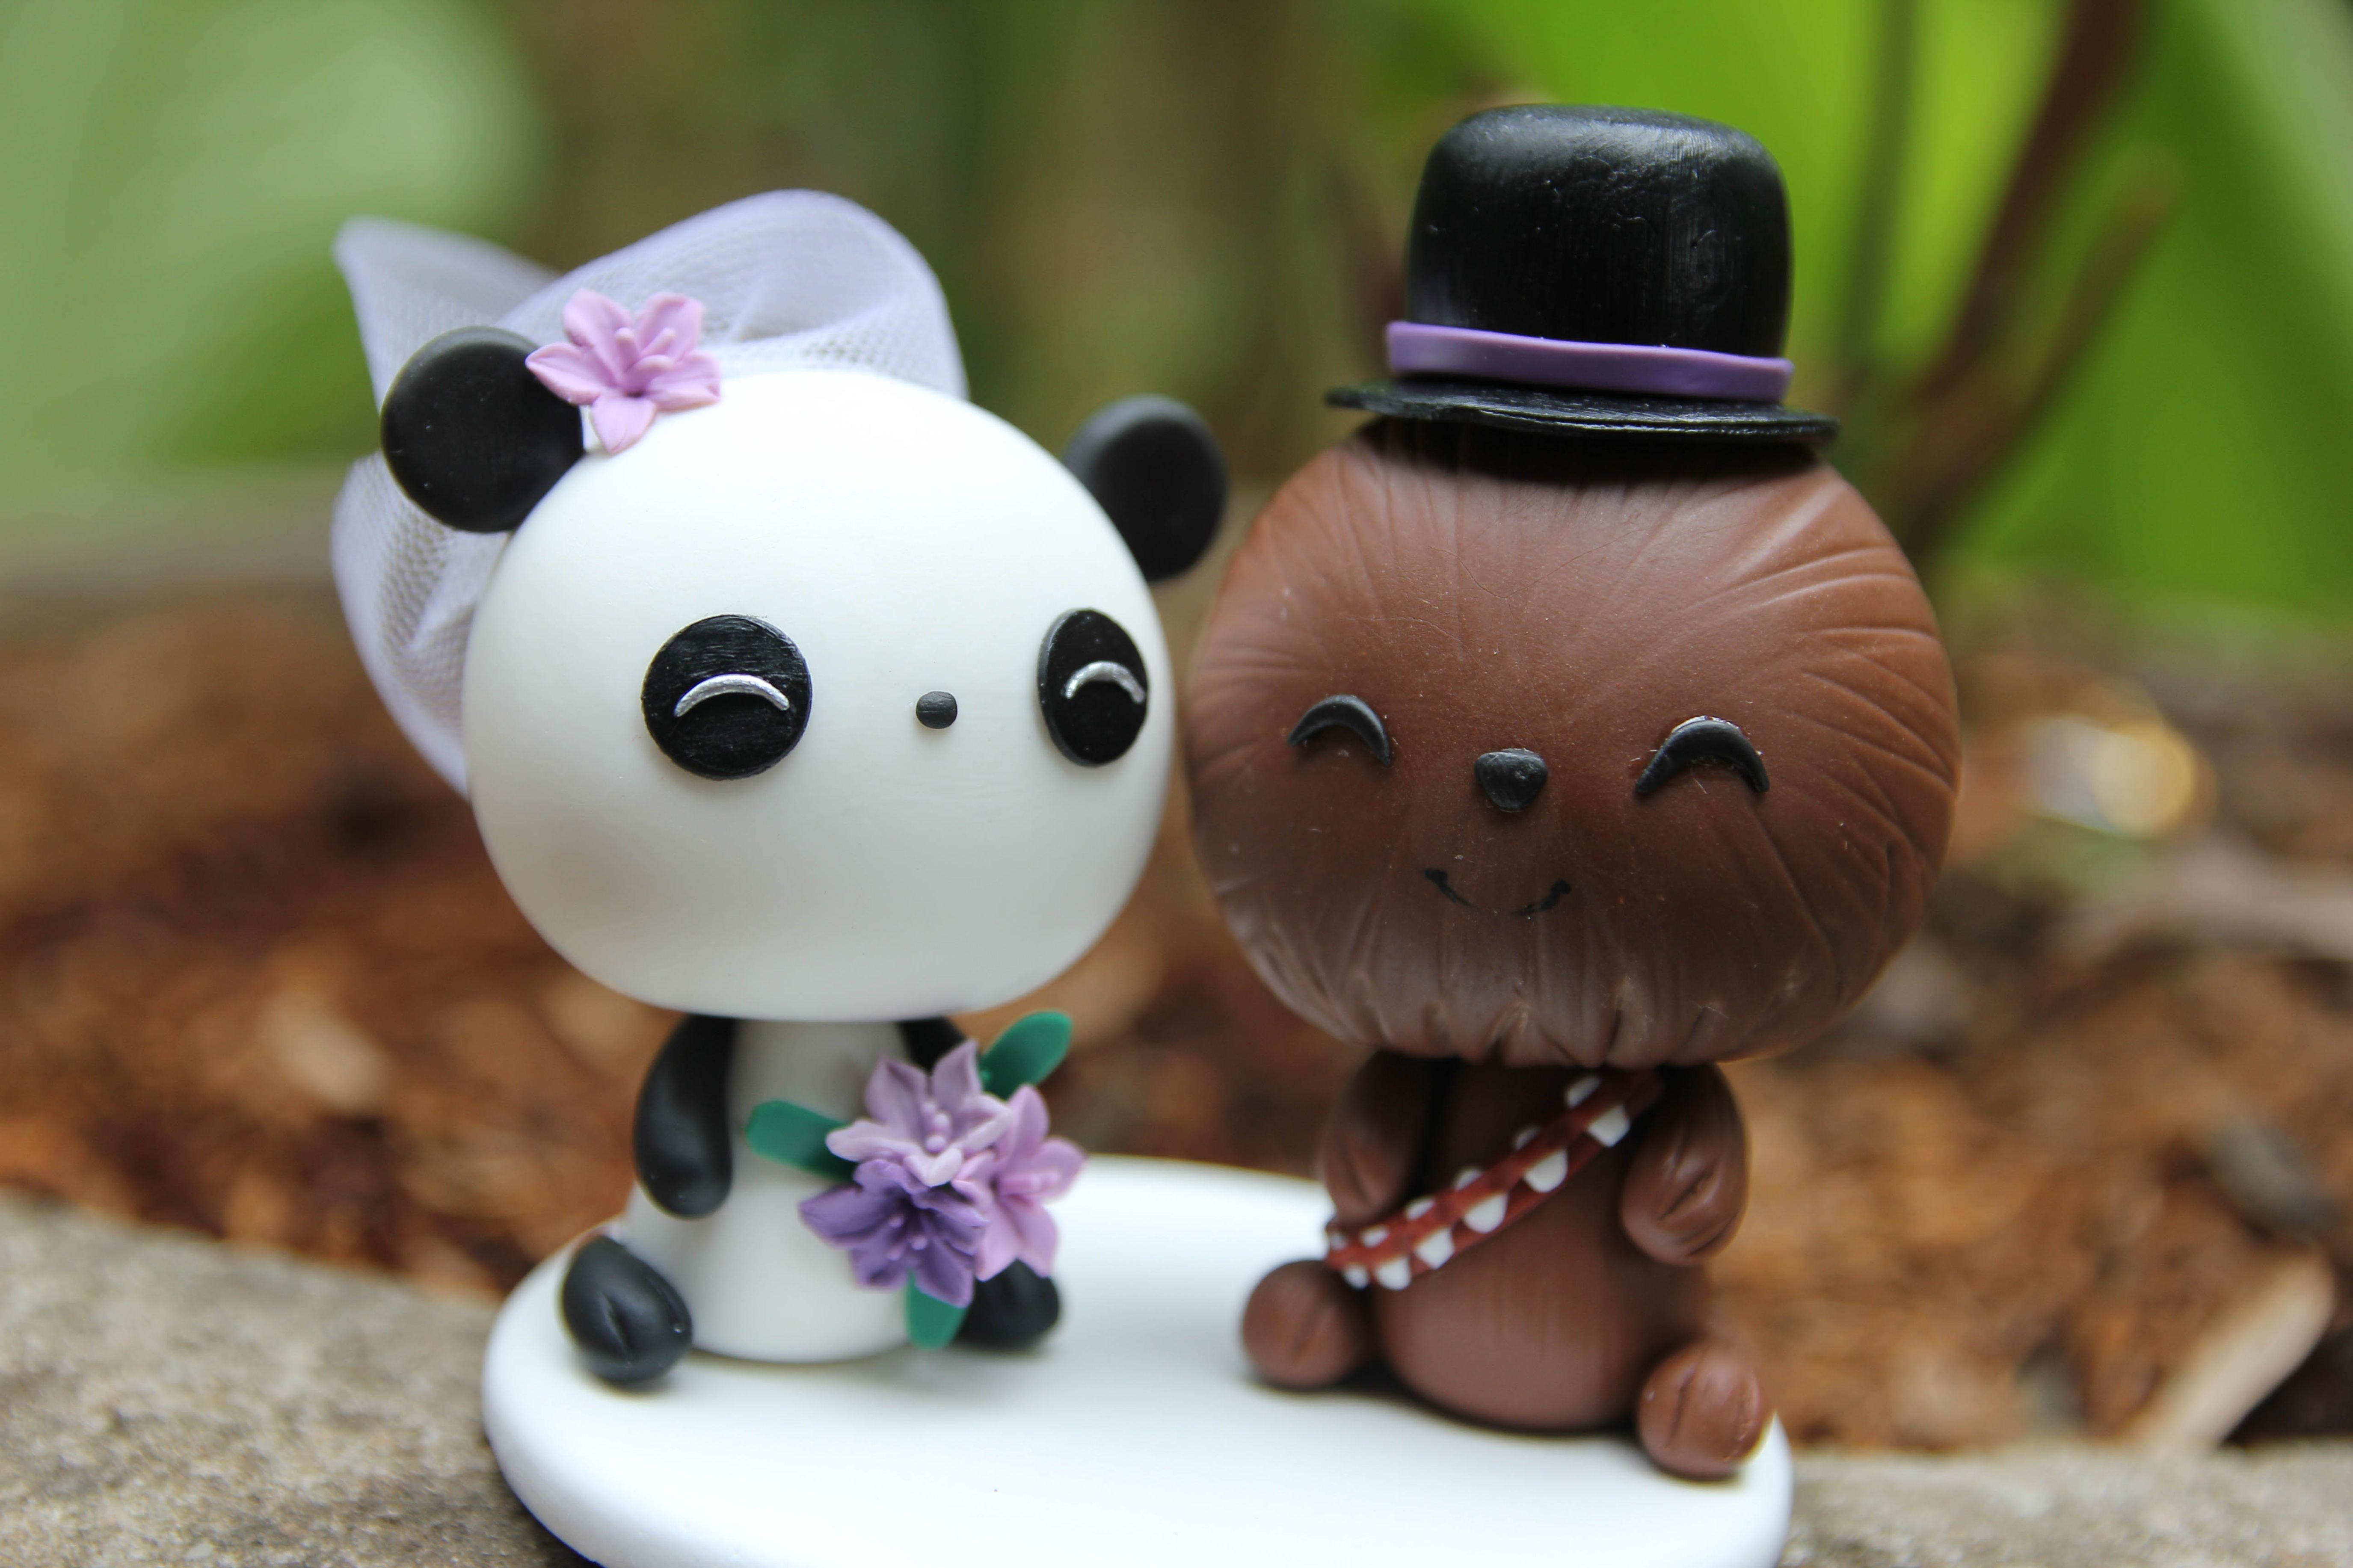 Picture of Chewbacca and Panda wedding cake topper, Star Wars fan wedding cake topper